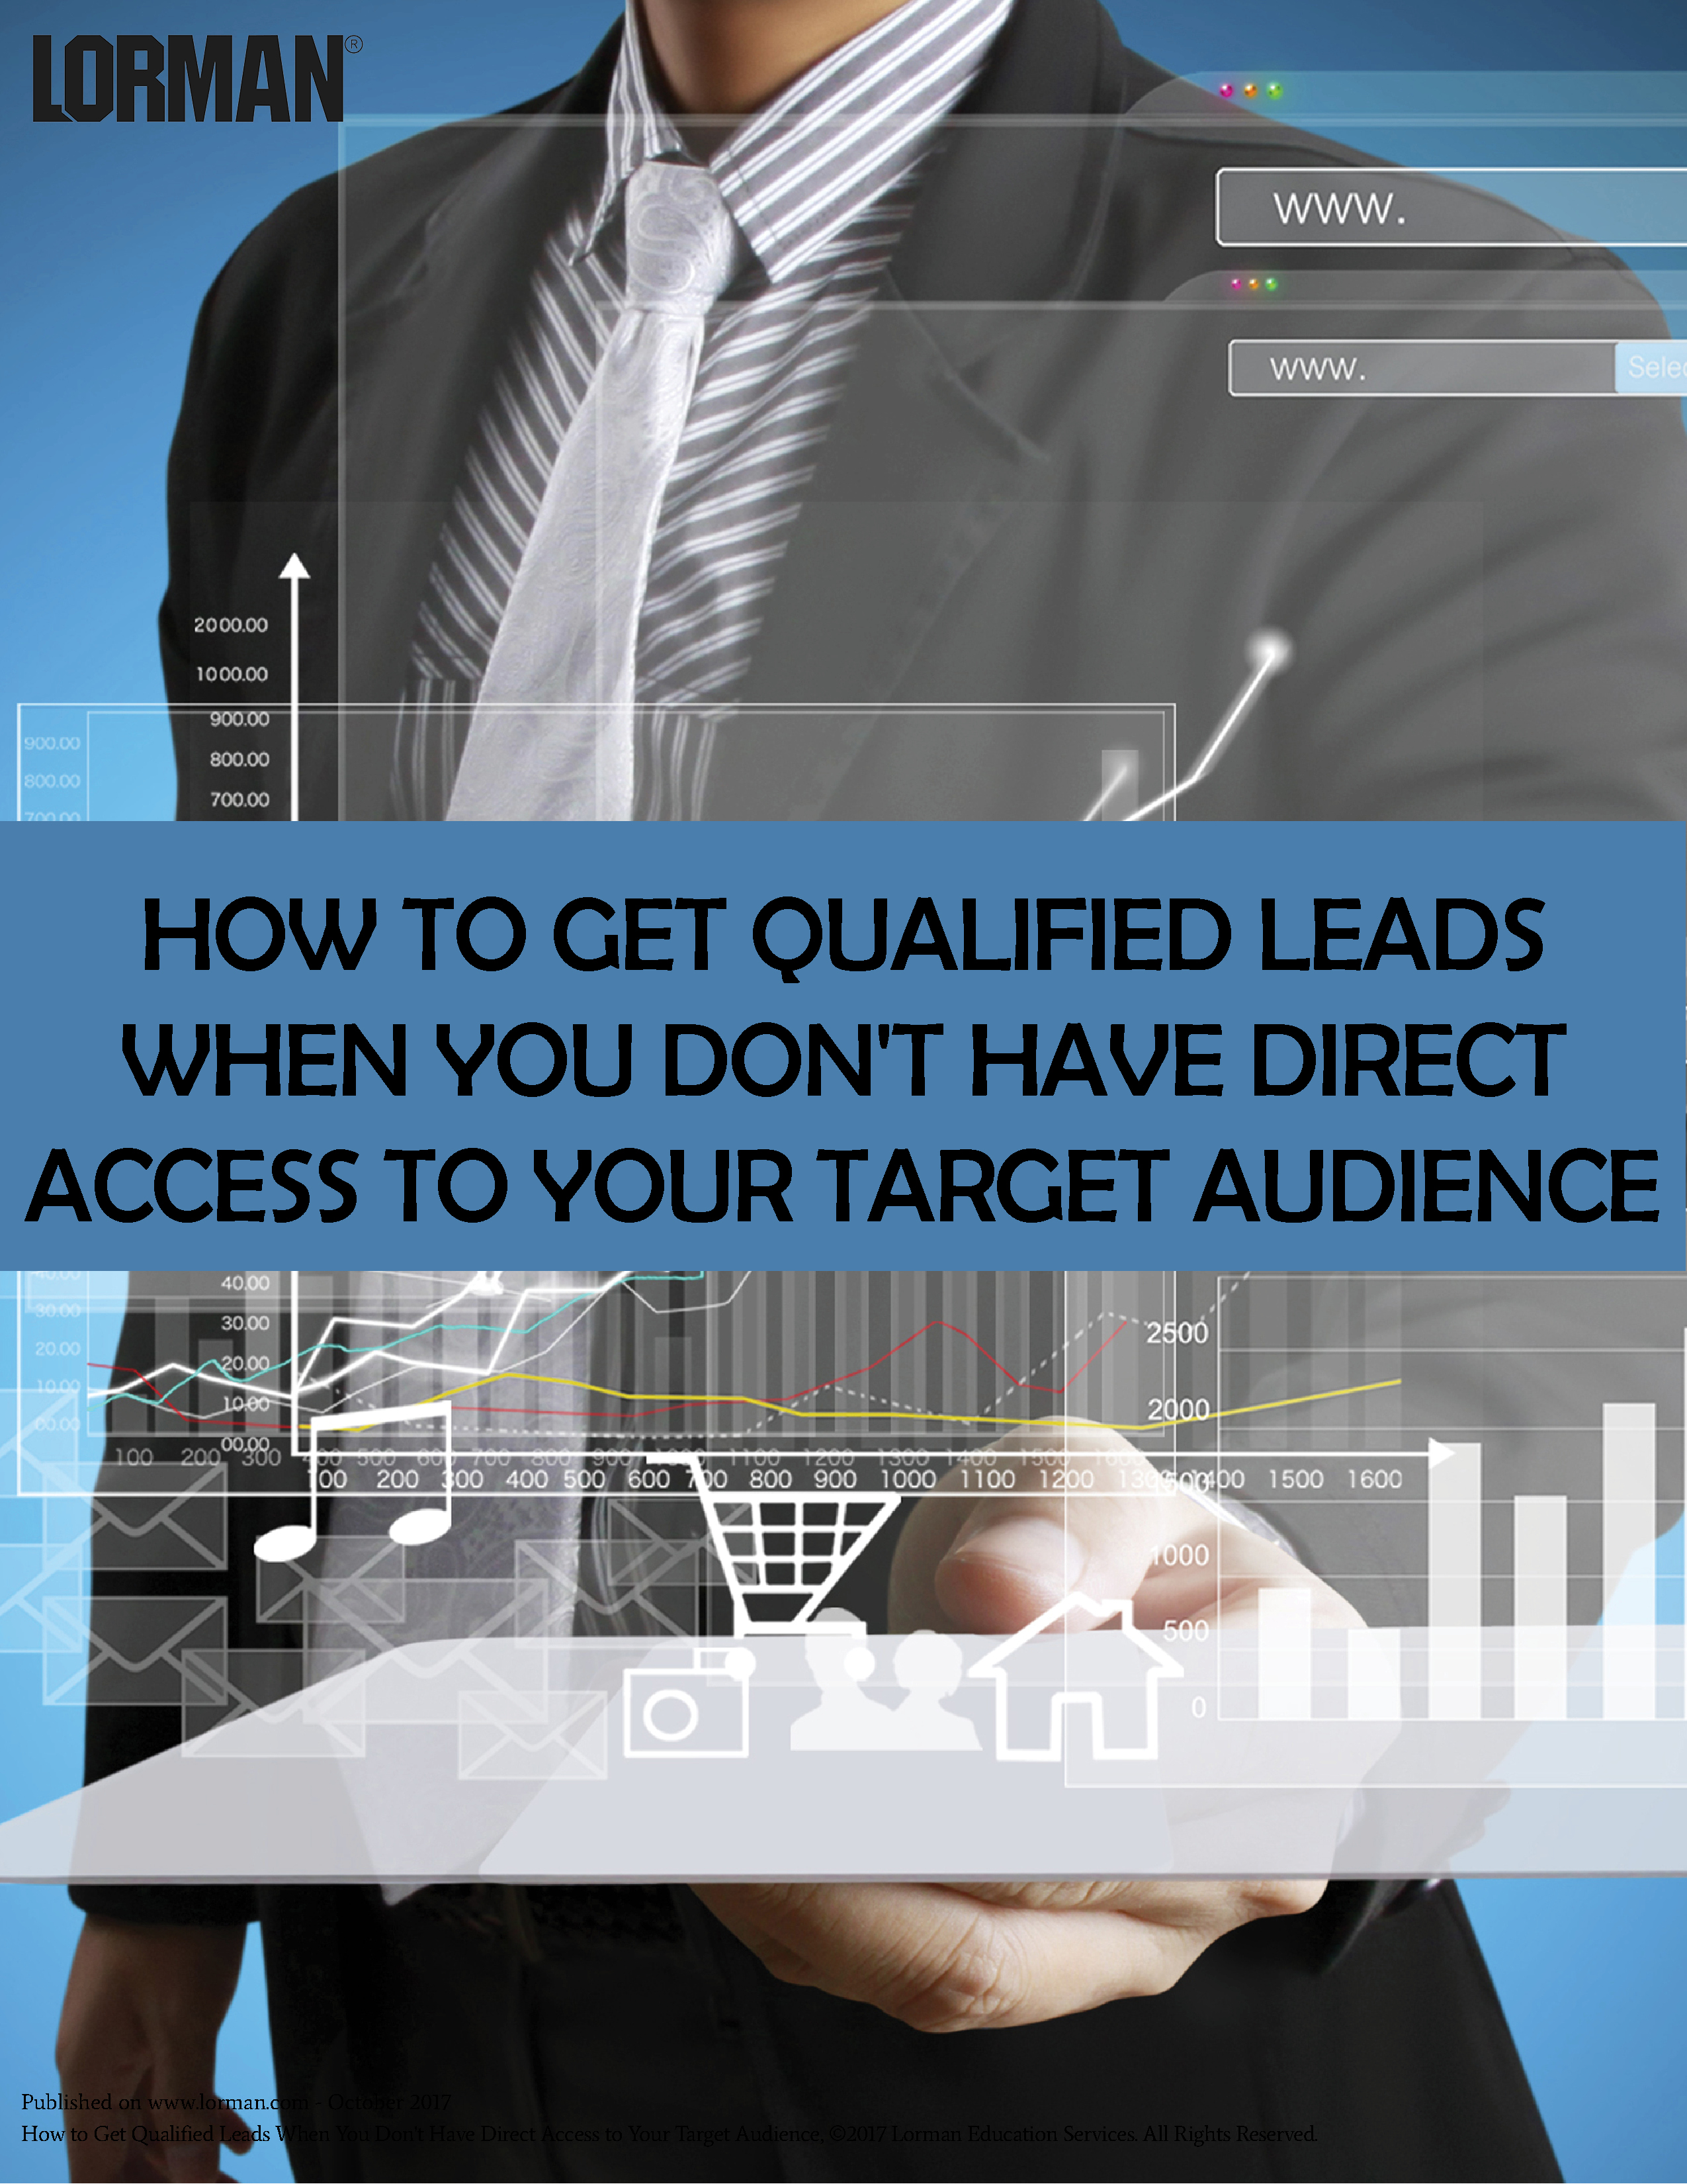 How to Get Qualified Leads When You Don't Have Direct Access to Your Target Audience